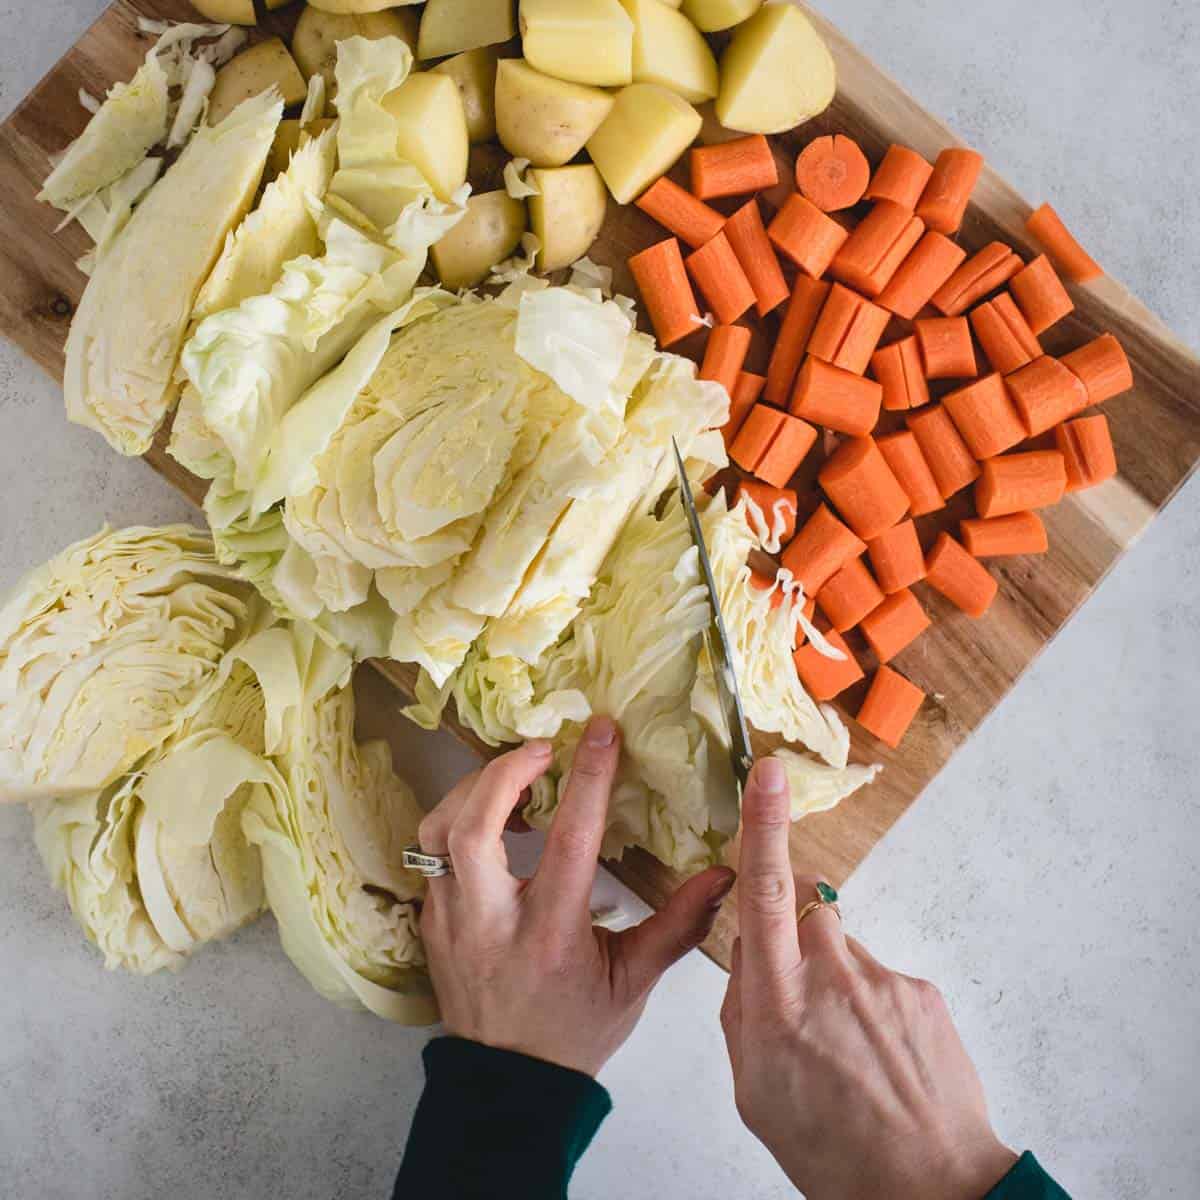 Hands cutting cabbage, carrots and potatoes